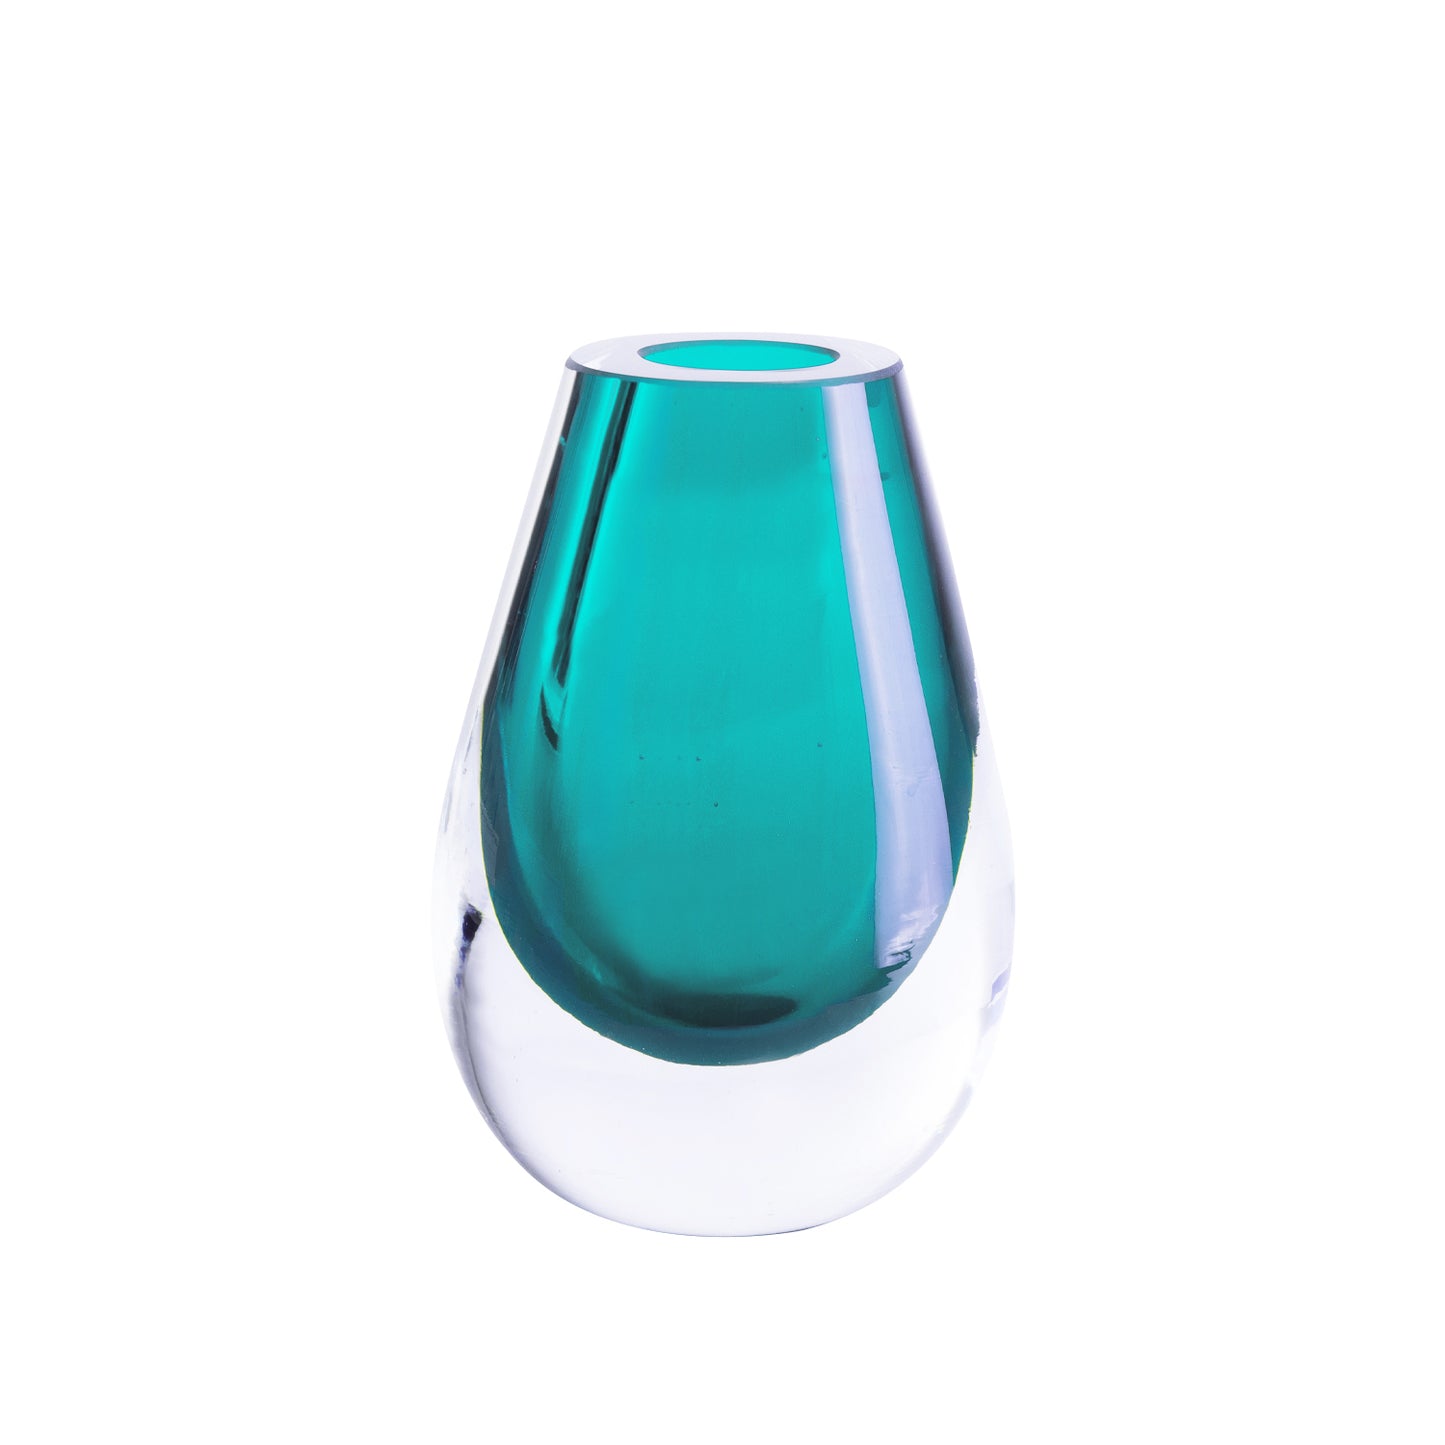 Drop Turquoise Vase - Mouth-Blown Thick Glass - Eco-Chic Decor